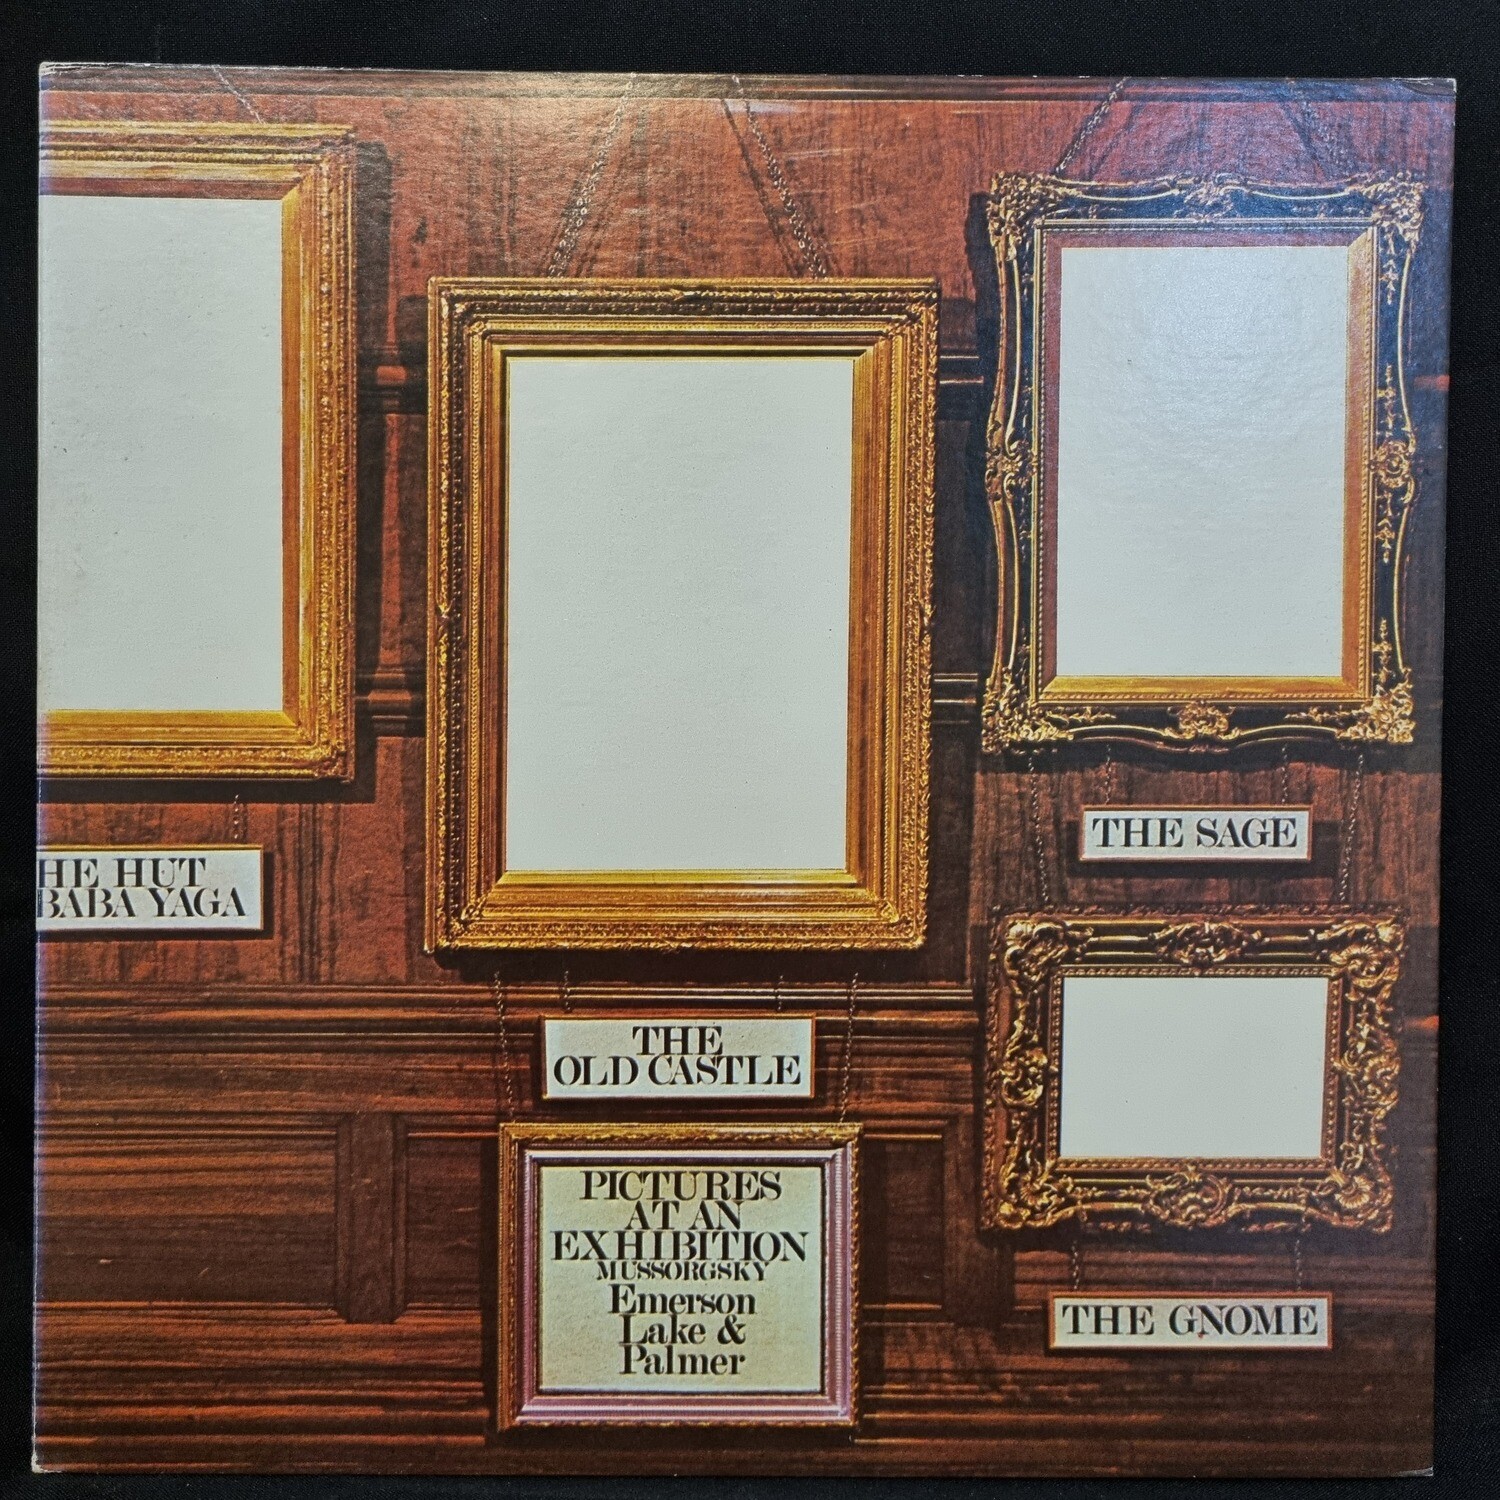 Emerson, Lake & Palmer- Pictures At An Exhibition